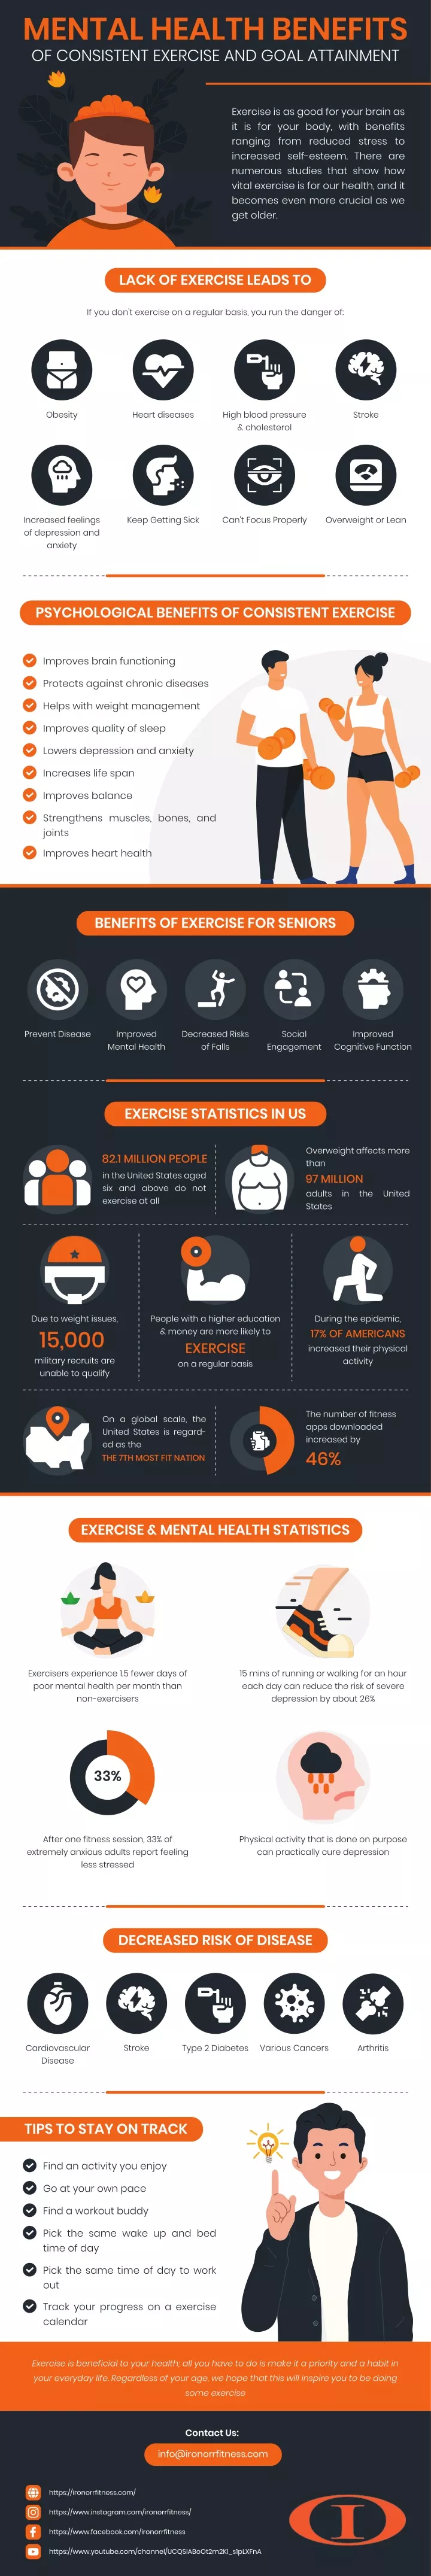 mental health benefits of consistent exercise